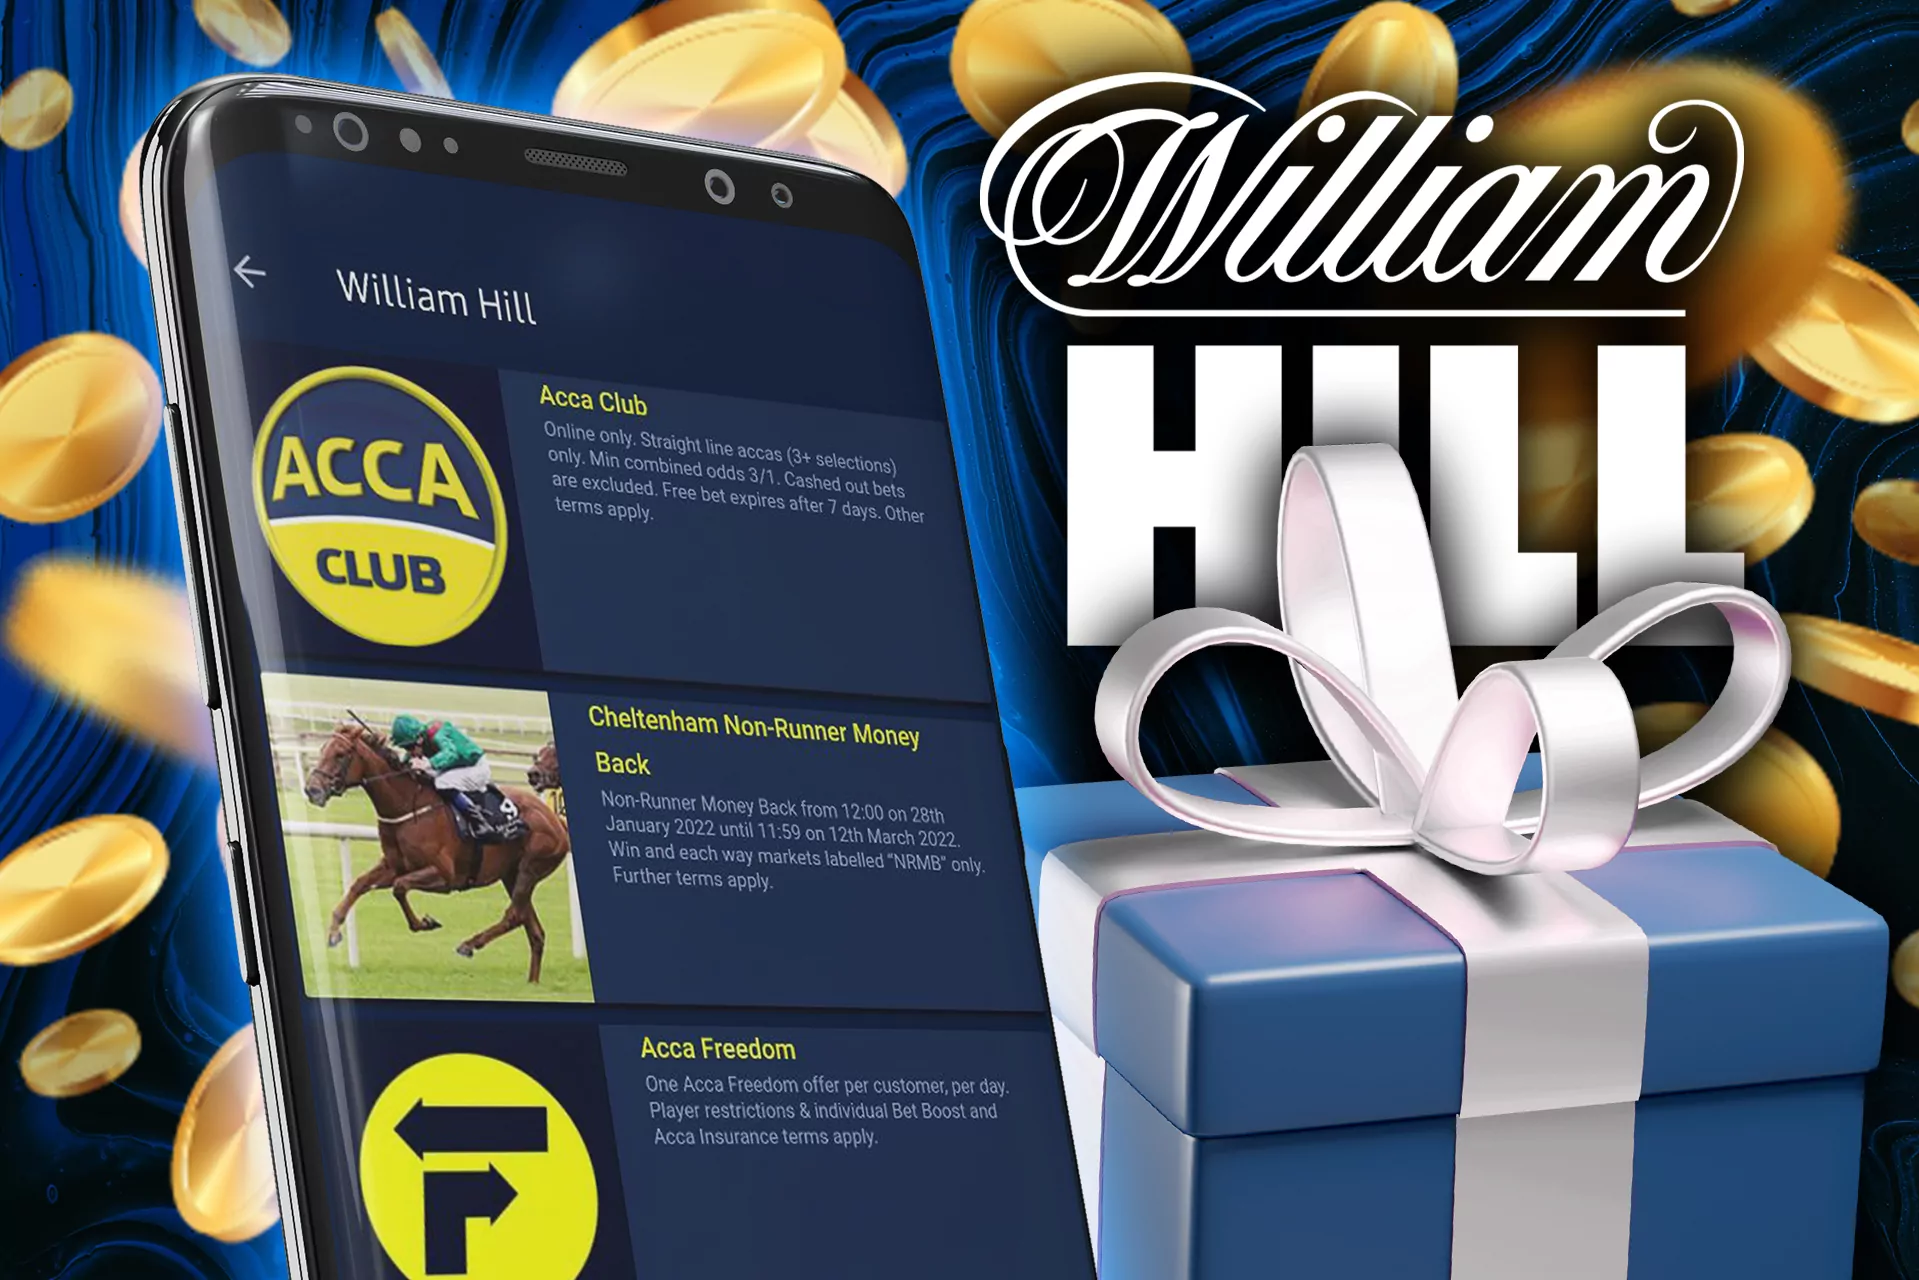 Get additional bonuses and promos in the William Hill app.